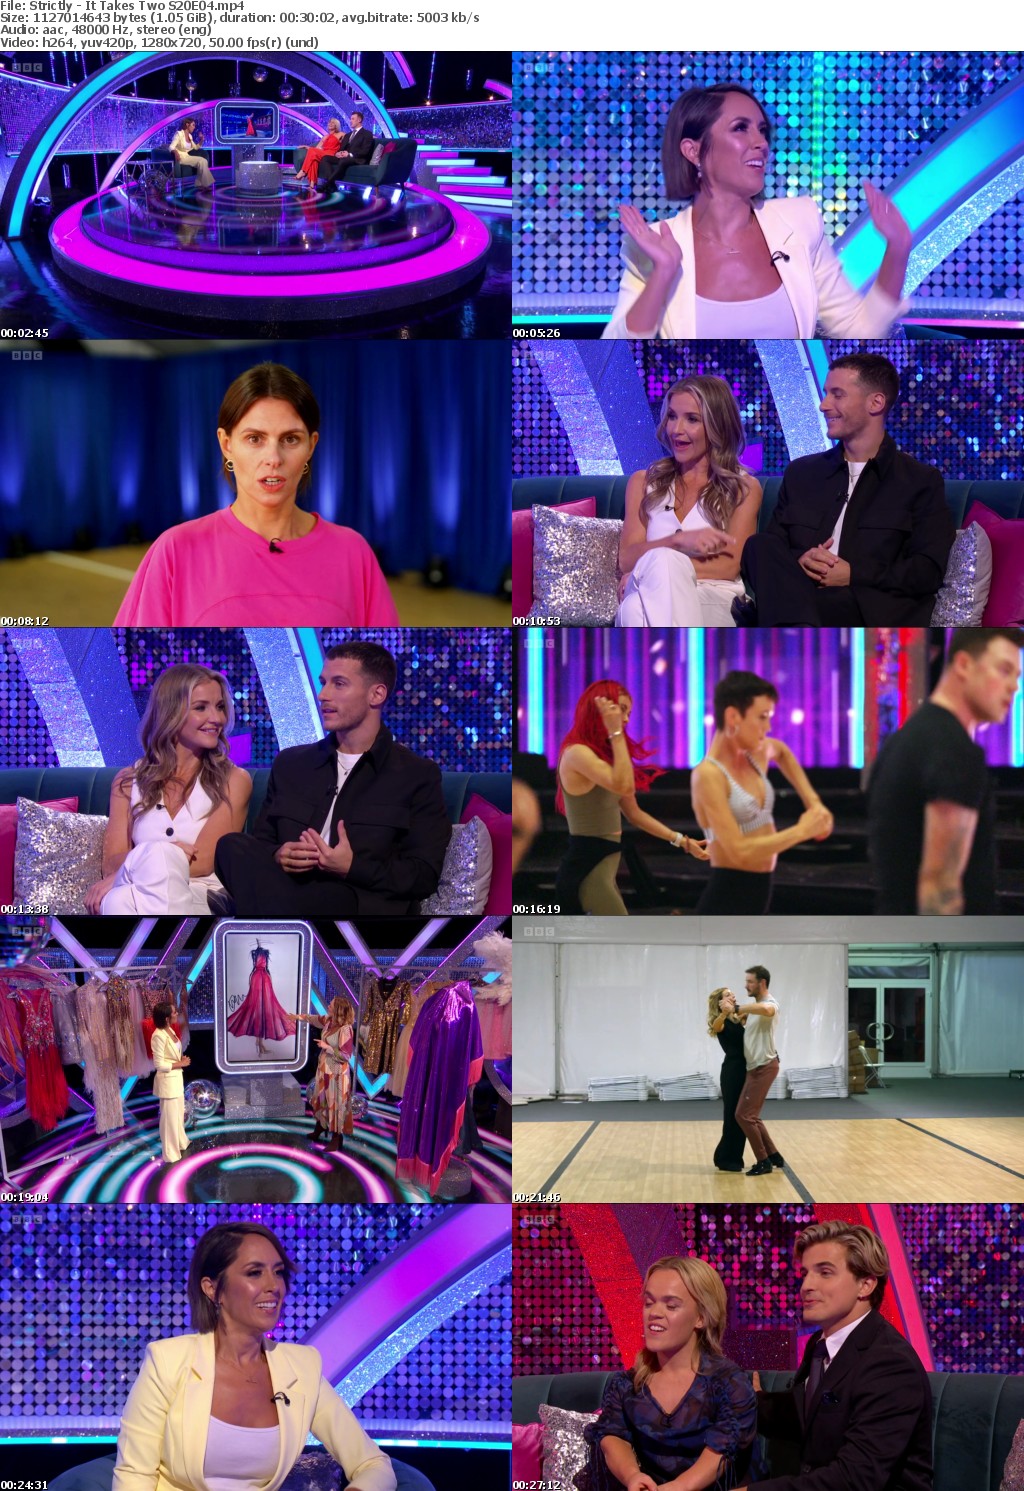 Strictly - It Takes Two S20E04 (1280x720p HD, 50fps, soft Eng subs)